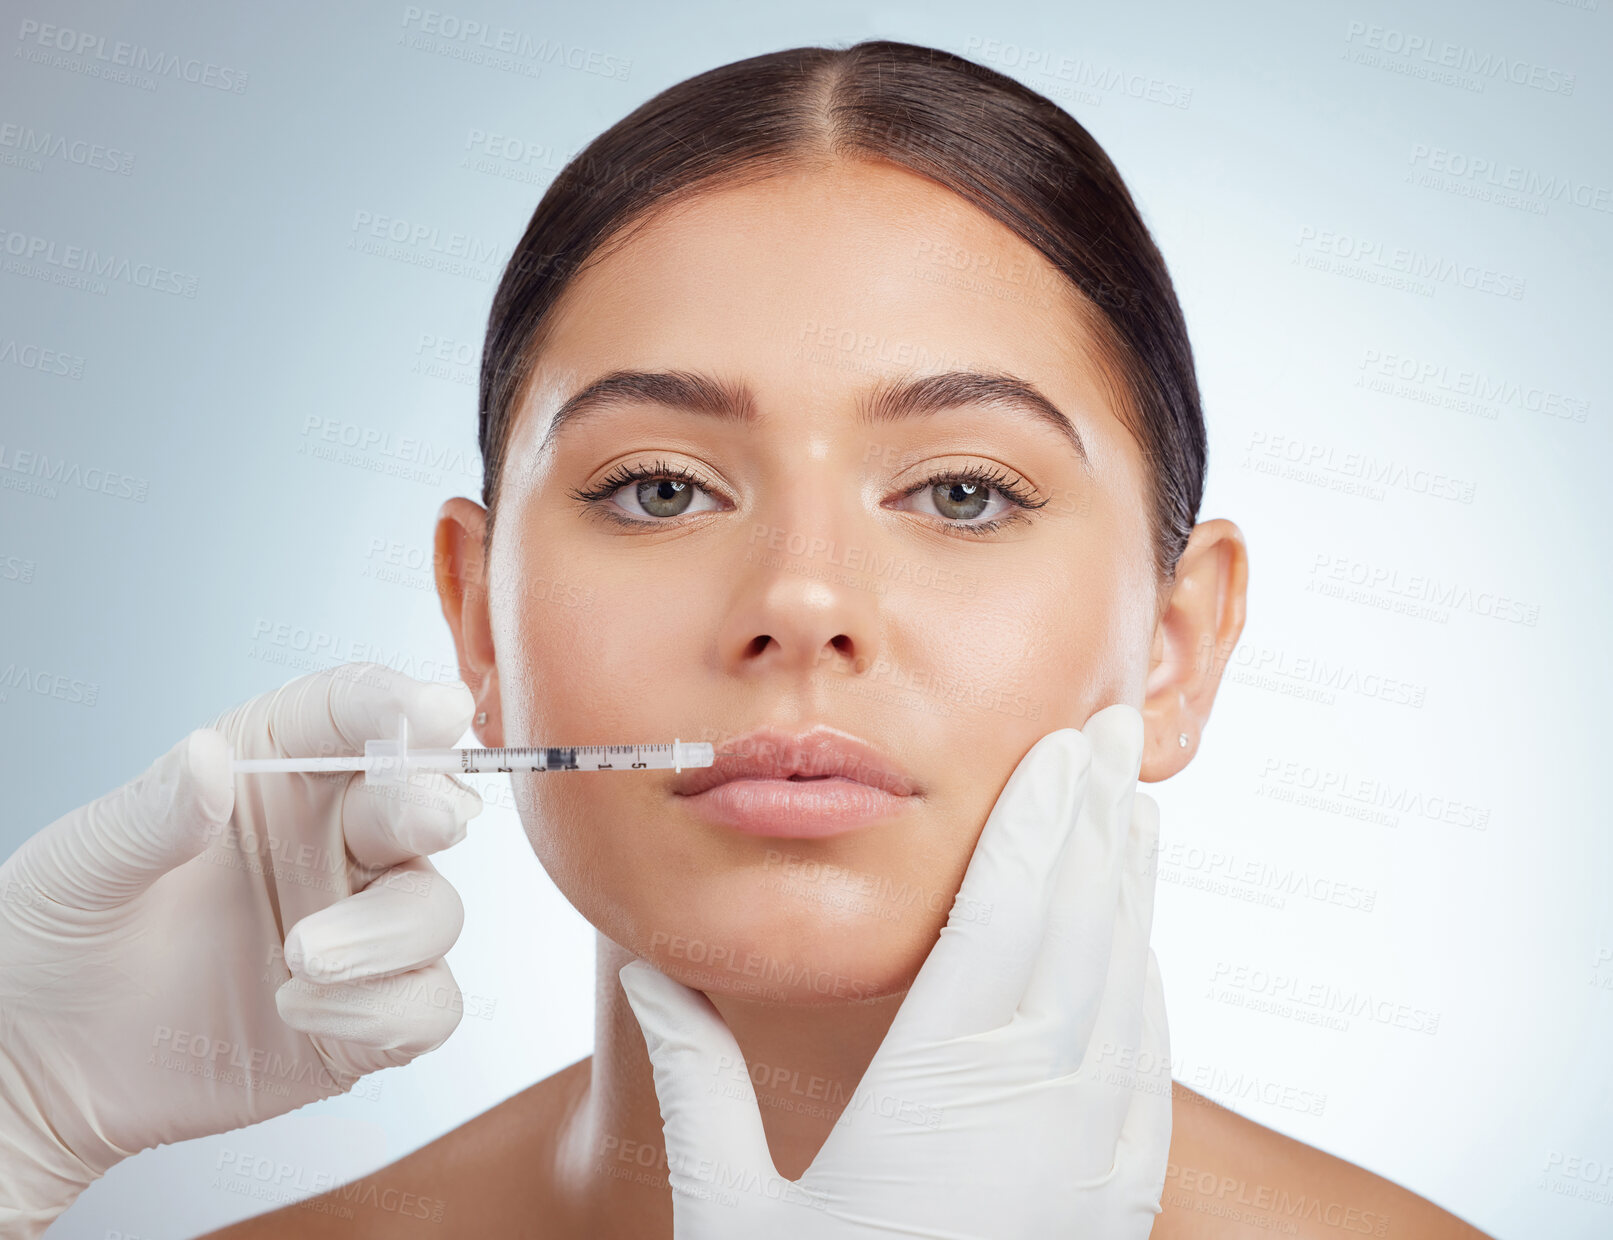 Buy stock photo Closeup portrait of woman getting lip fillers or botox. Young caucasian model isolated against grey studio background with copyspace. Dermatologist injecting patient in anti ageing cosmetic procedure